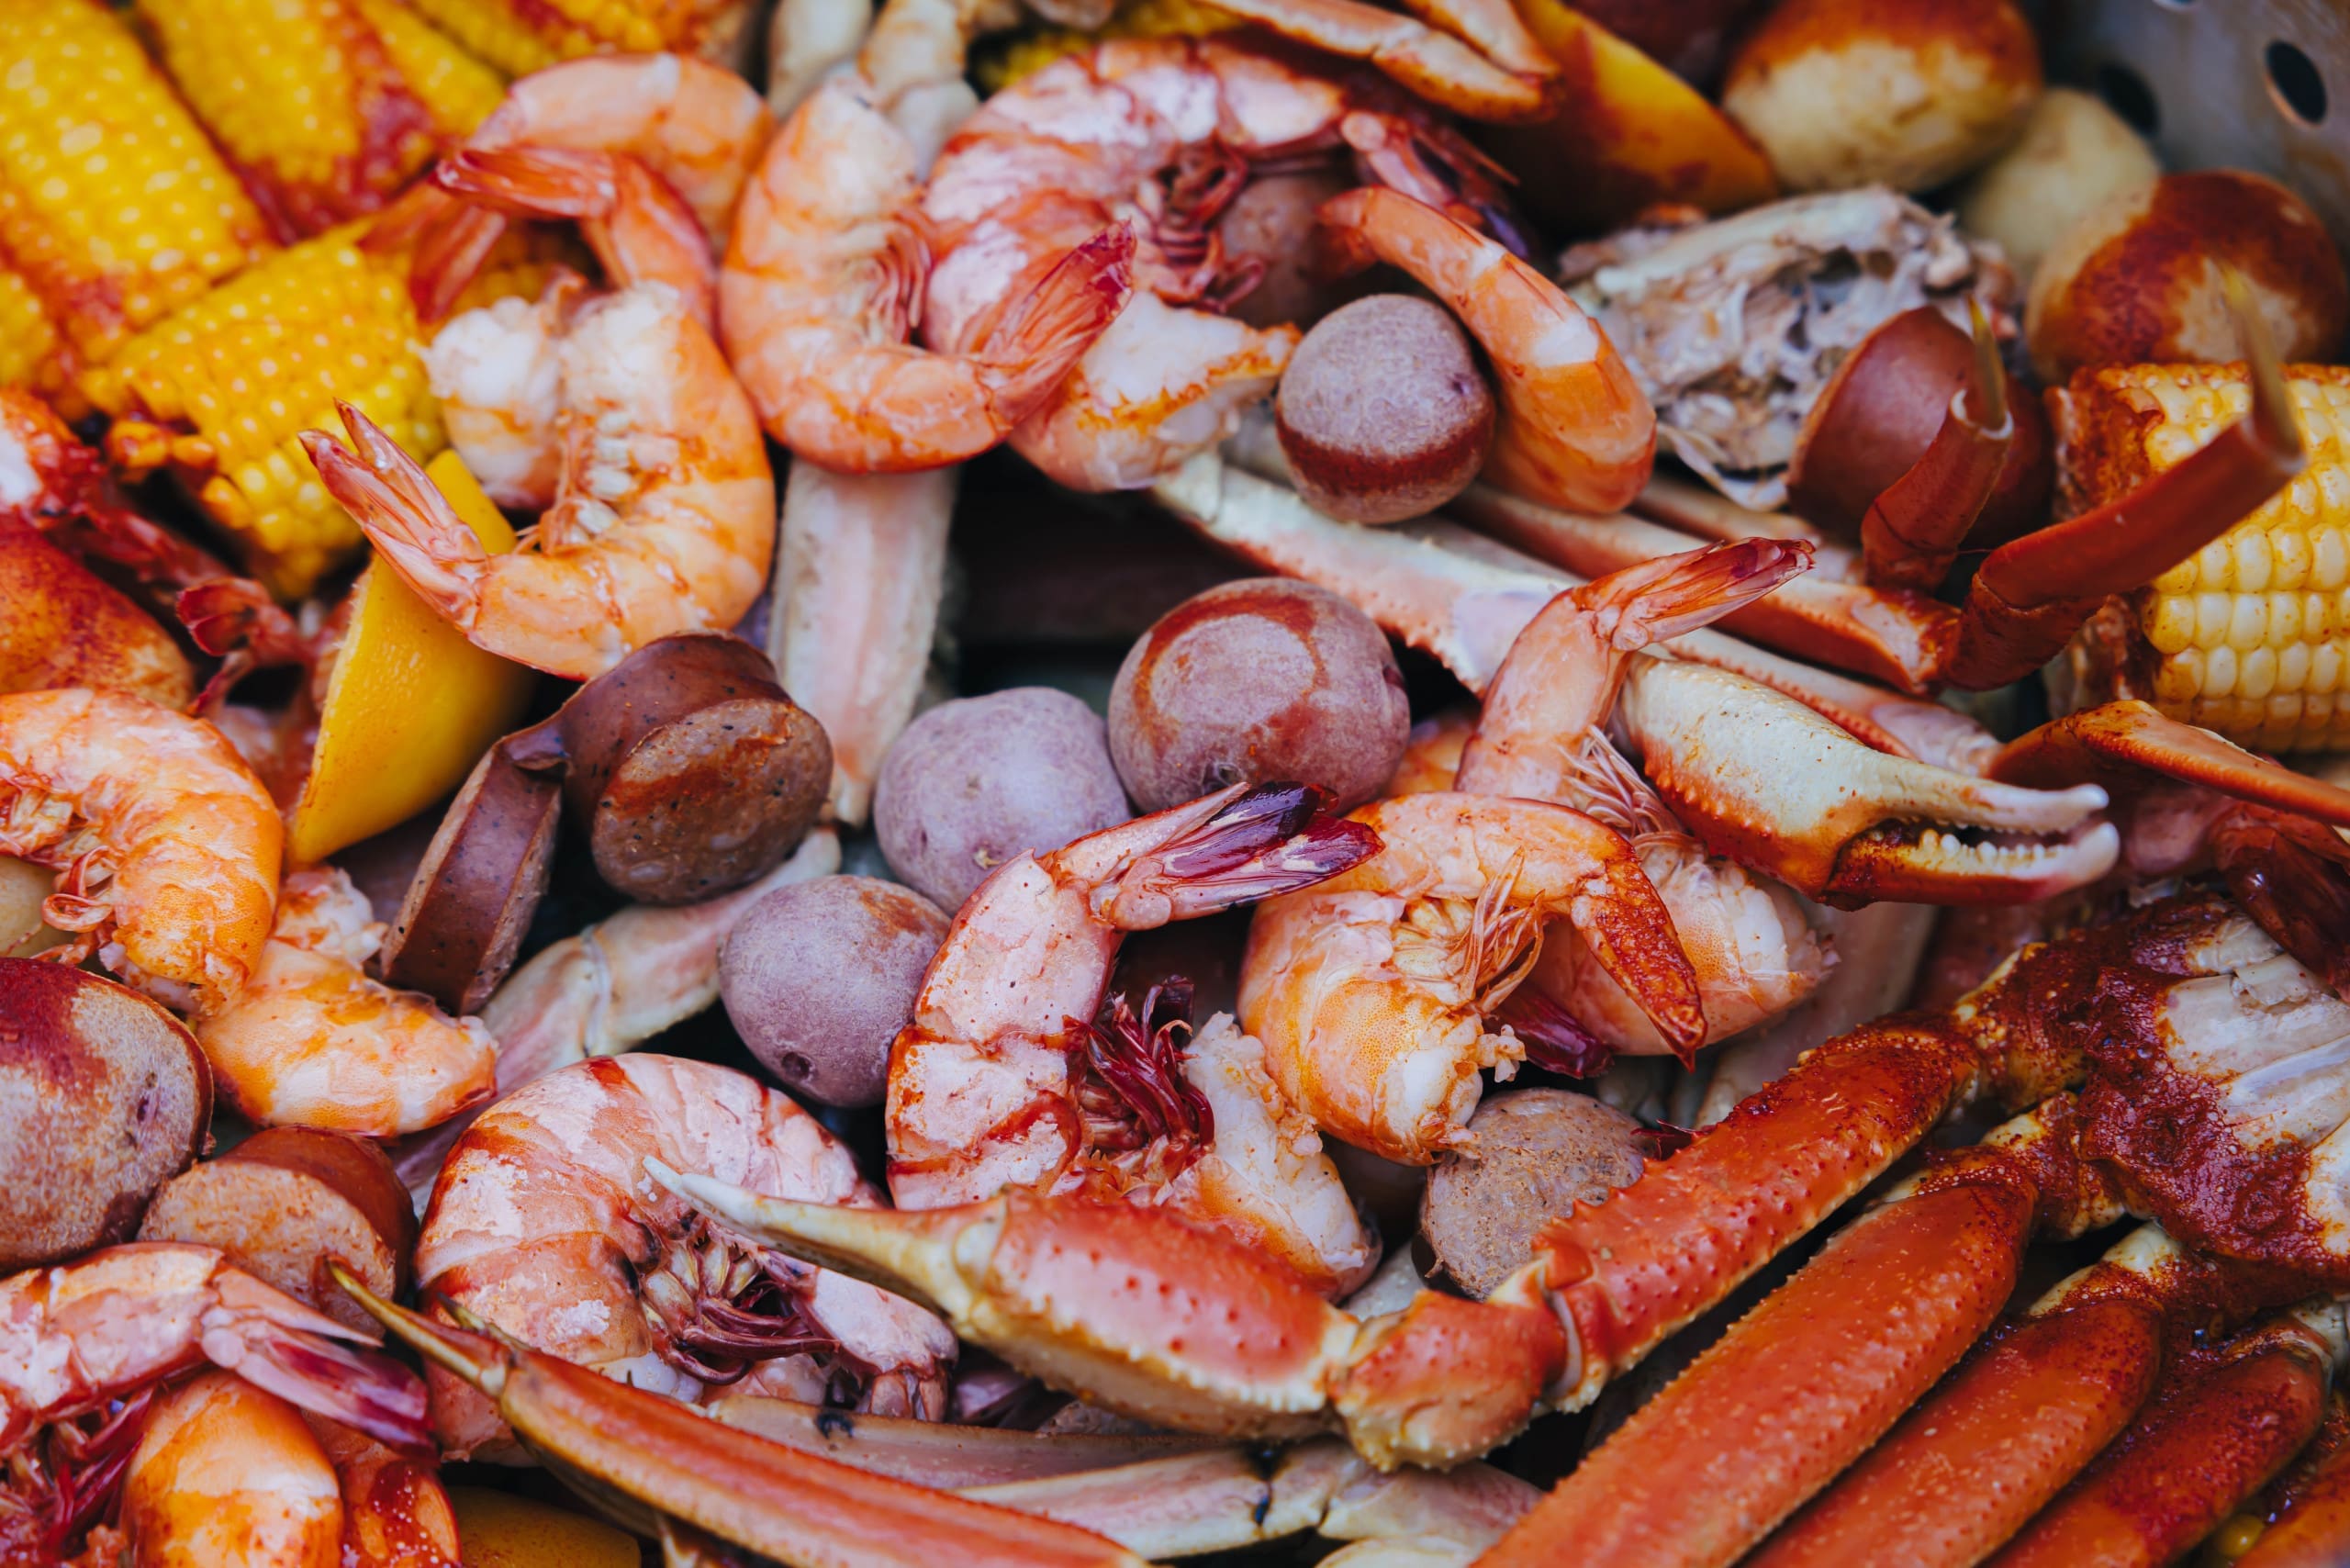 Try the New Orleans Seafood Boil at Ocean Crab